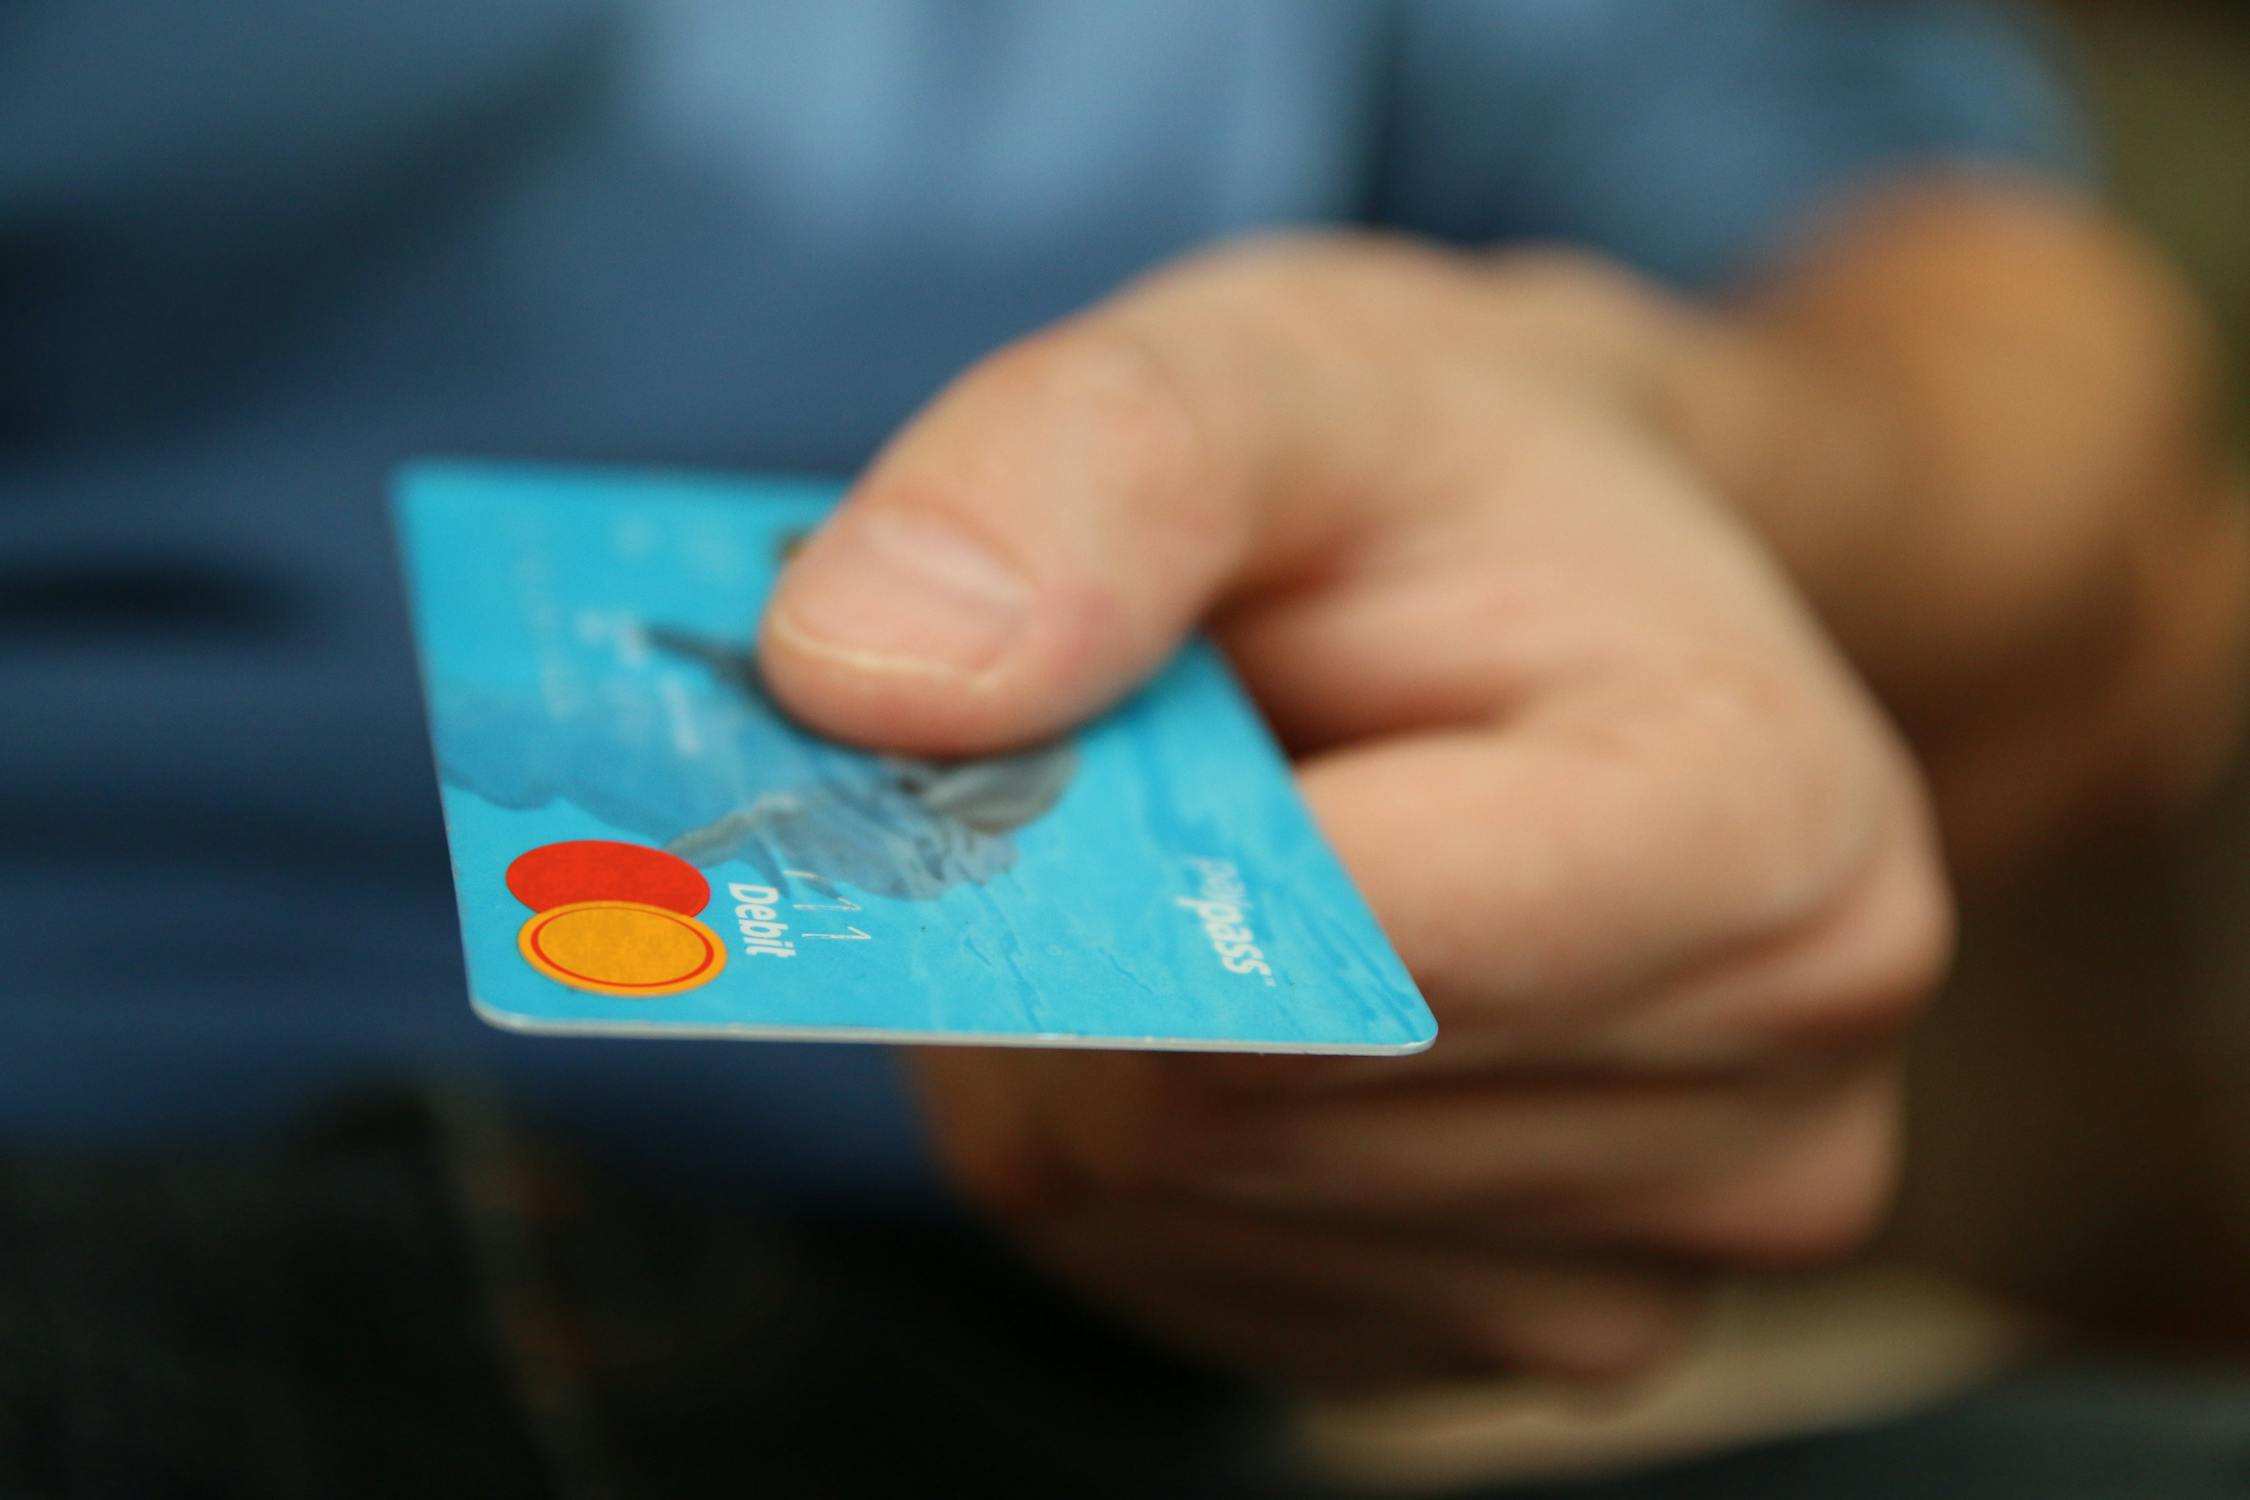 A person holding a bank card